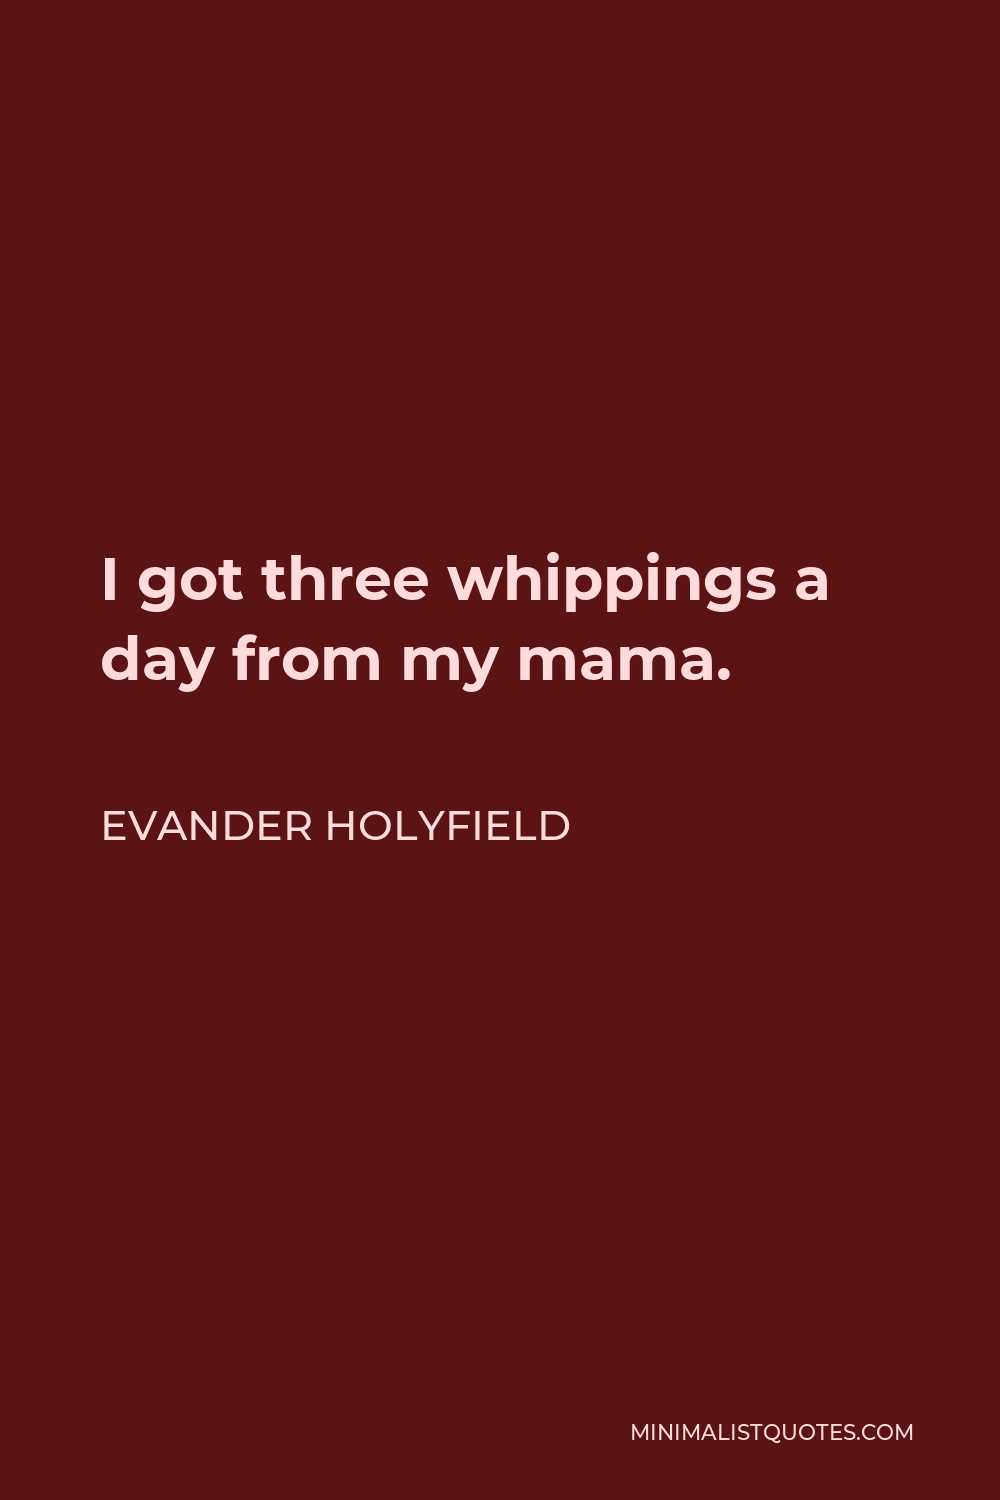 Evander Holyfield Quote - I got three whippings a day from my mama.